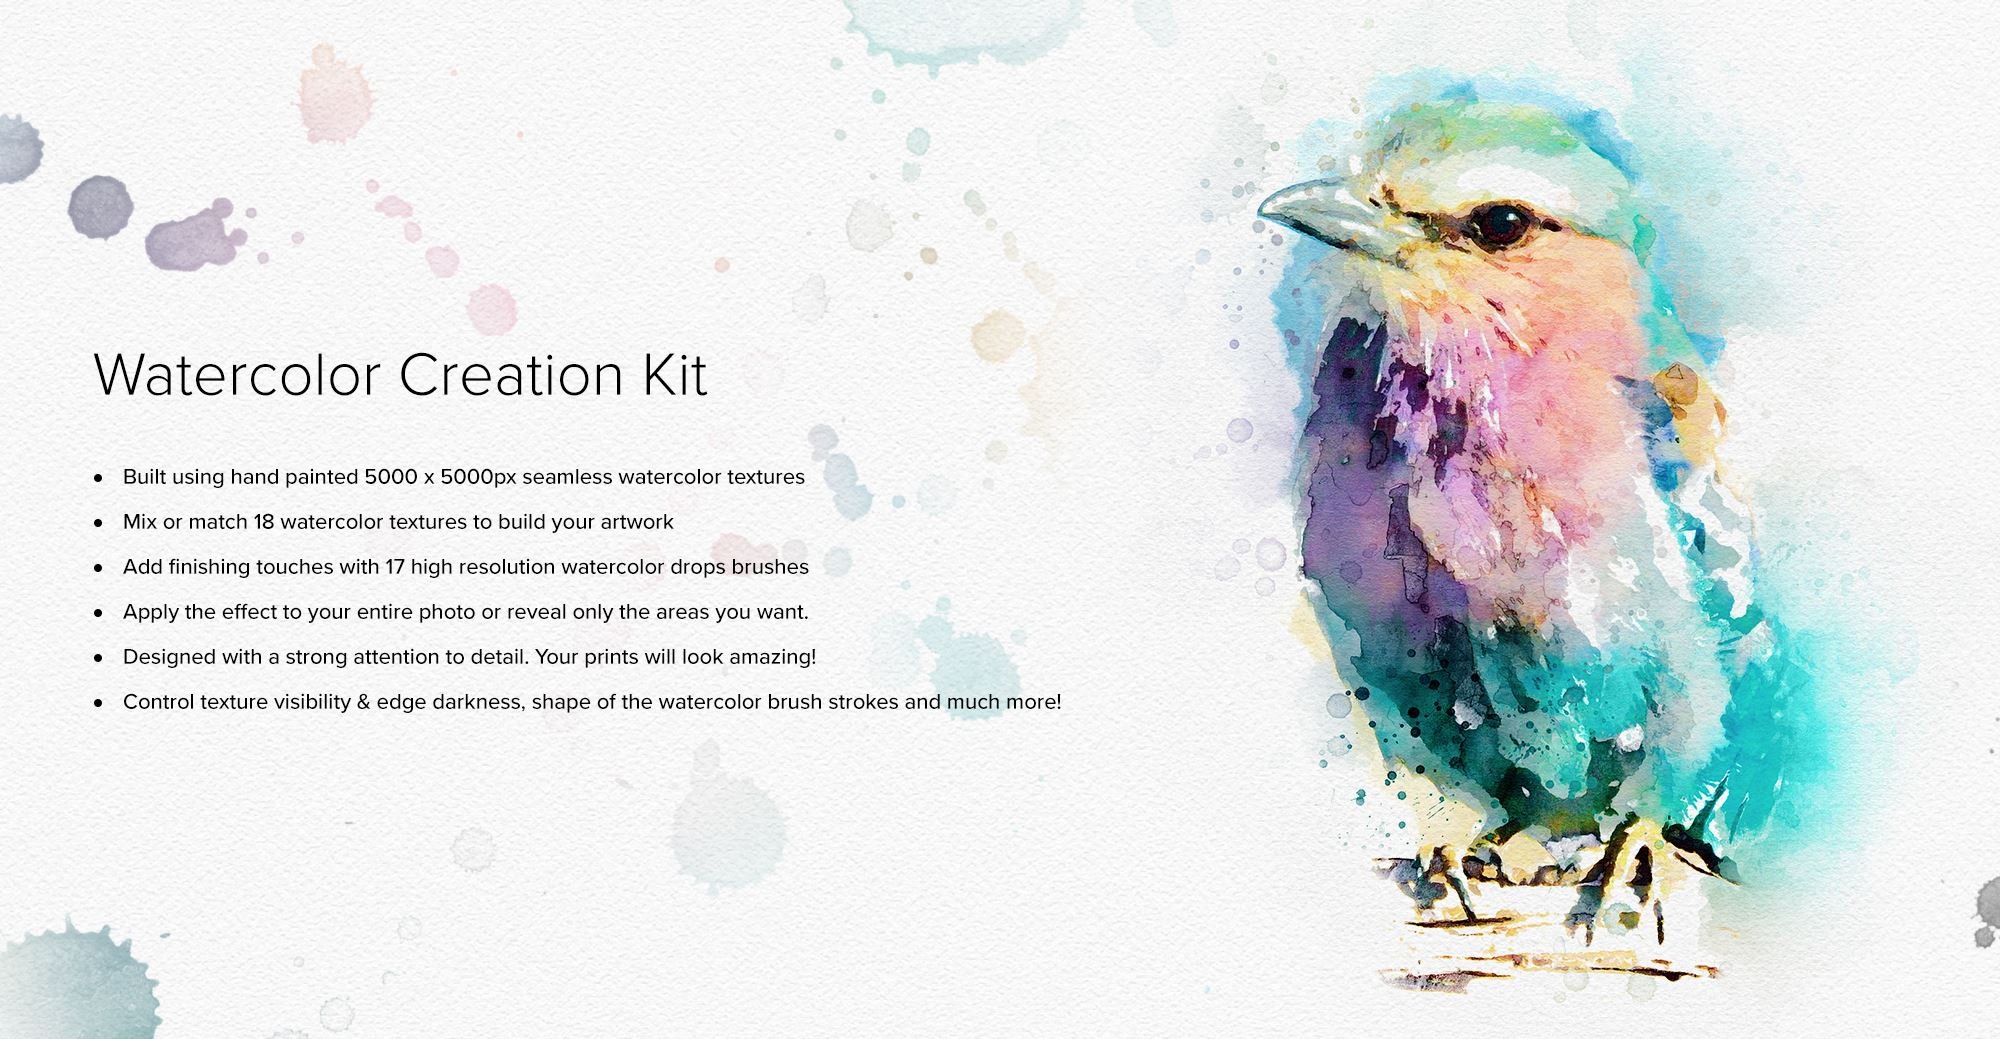 Watercolor Creation Kitpreview image.